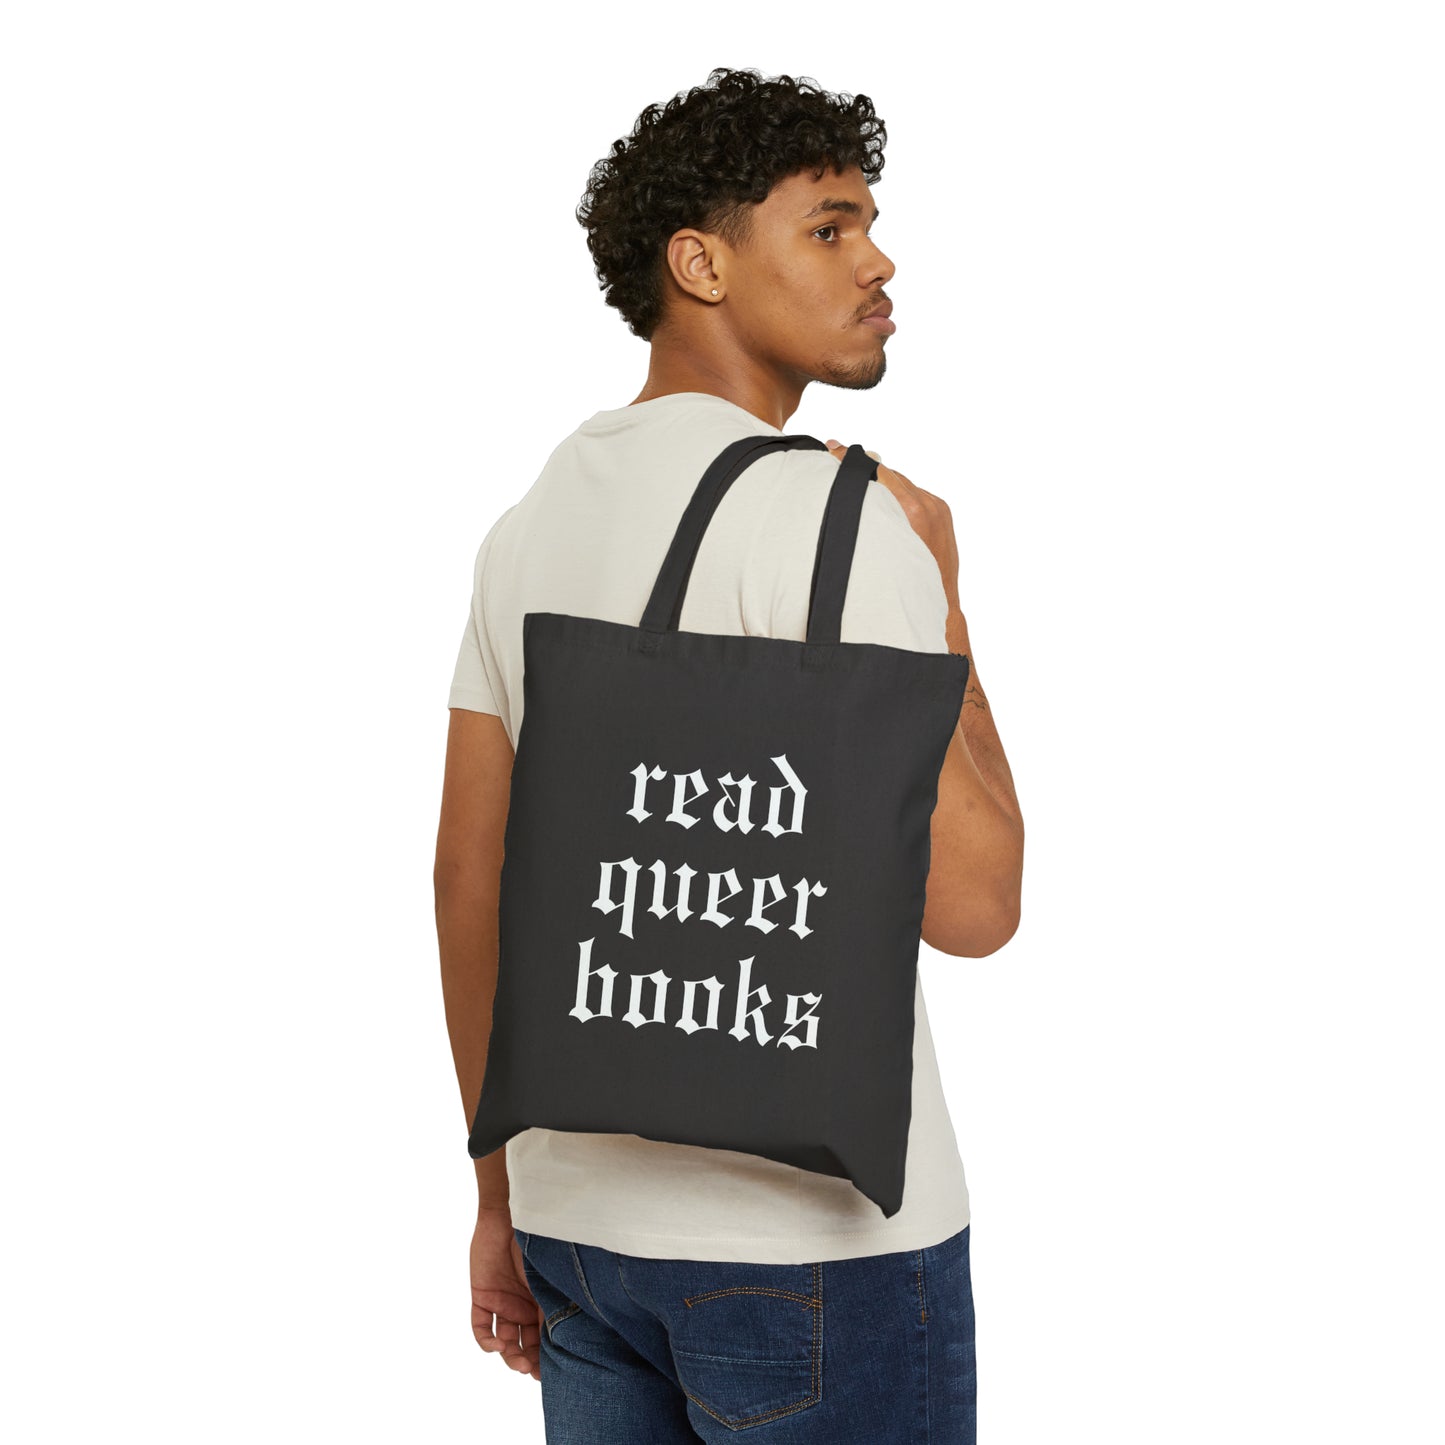 Read Queer Books Canvas Tote Bag